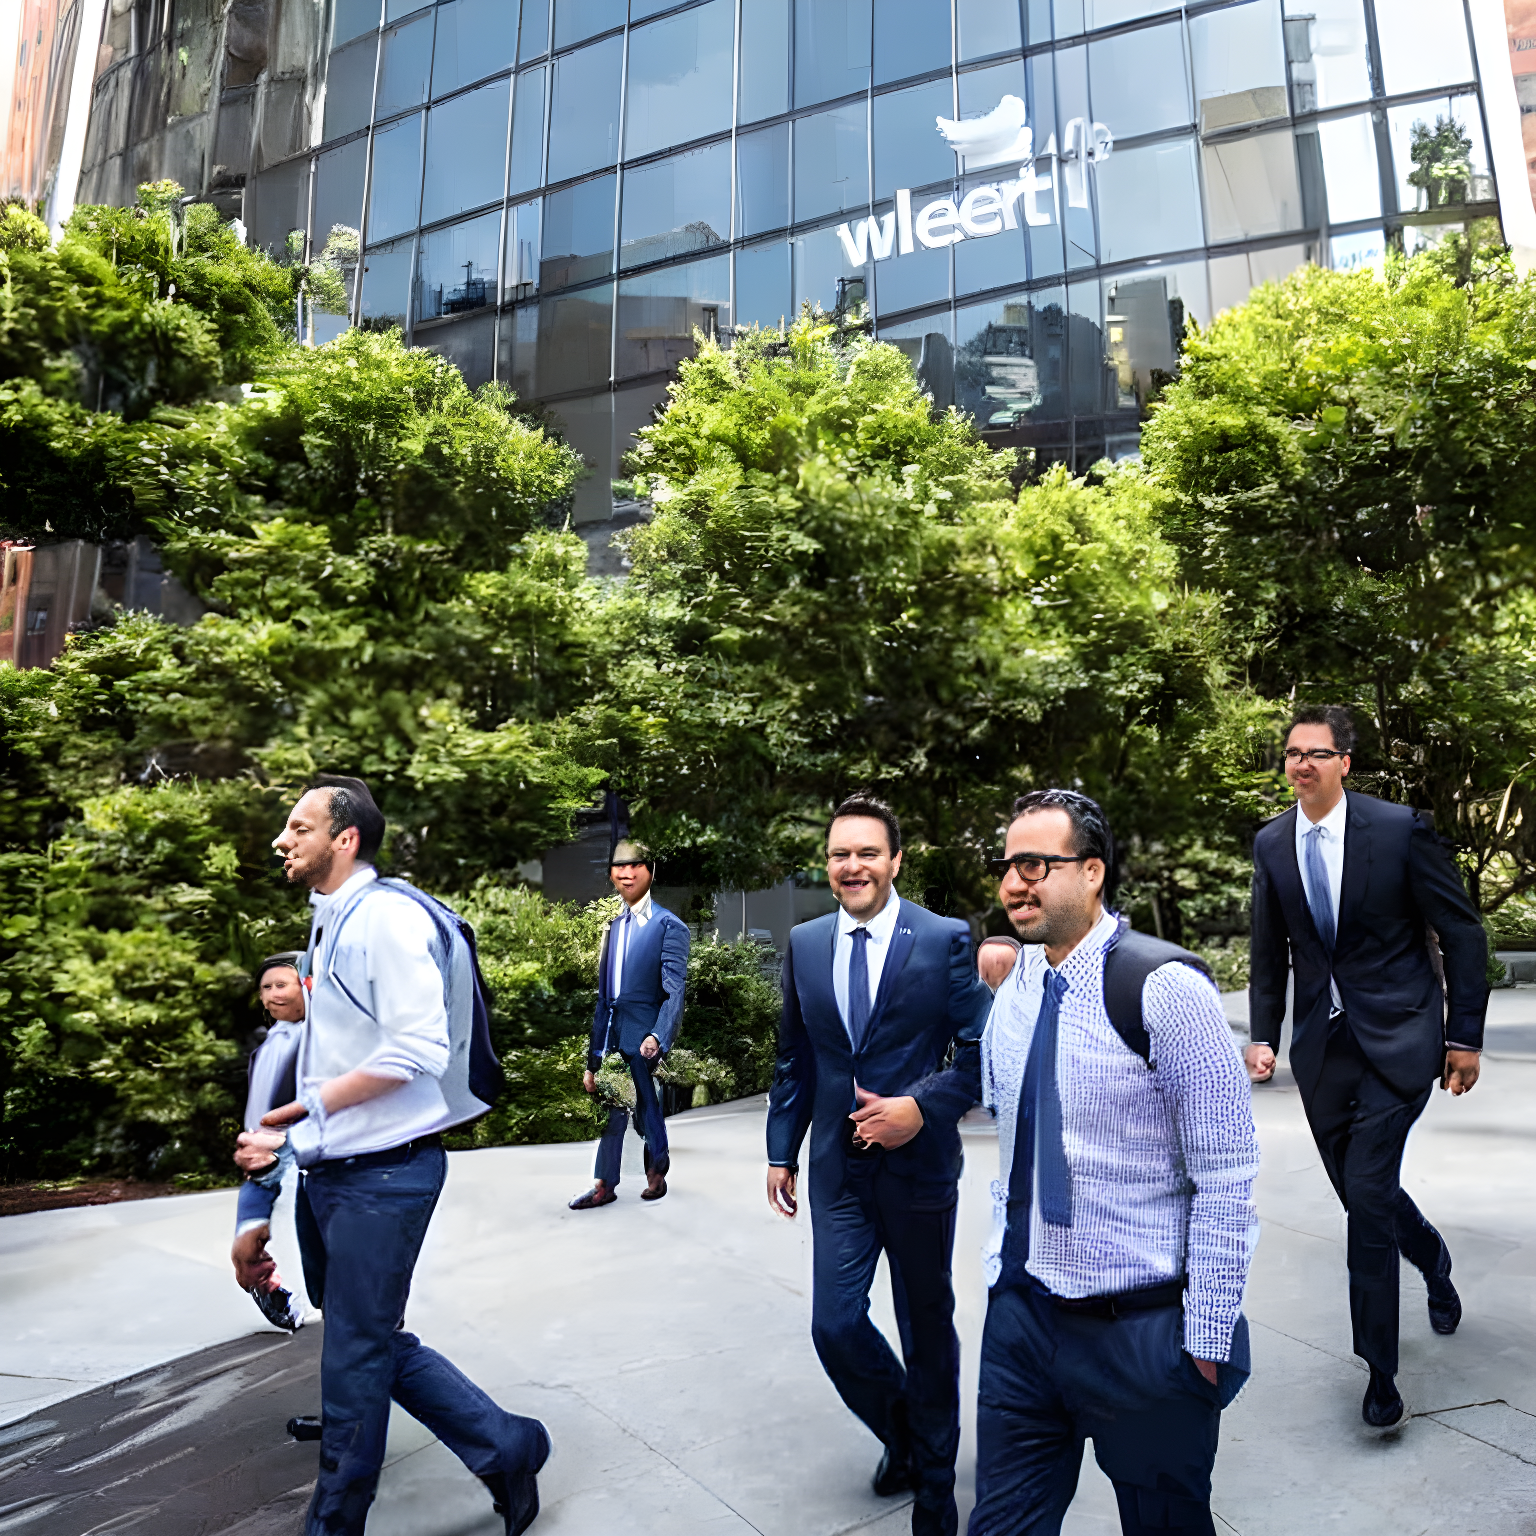 Employees exiting twitter HQ